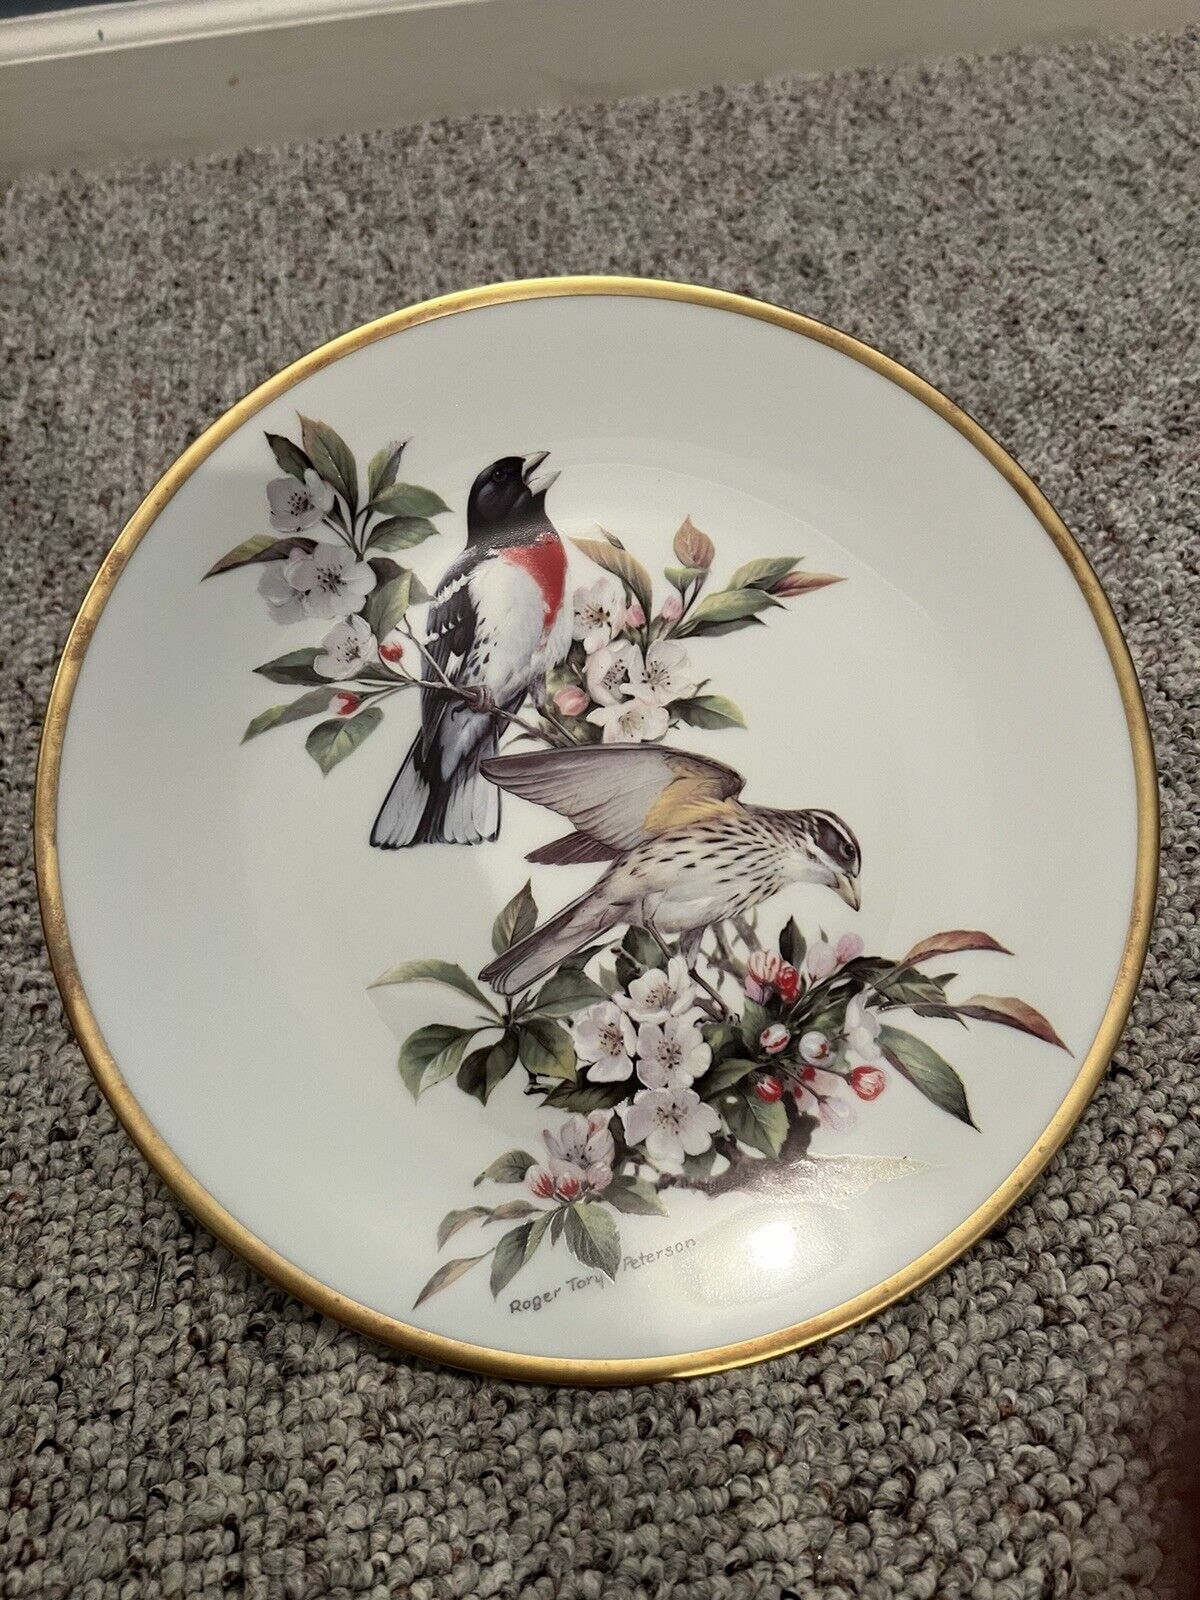 Songbirds of Roger Tory Peterson Collector Plate 1981 Rose-Breasted Grosbeak